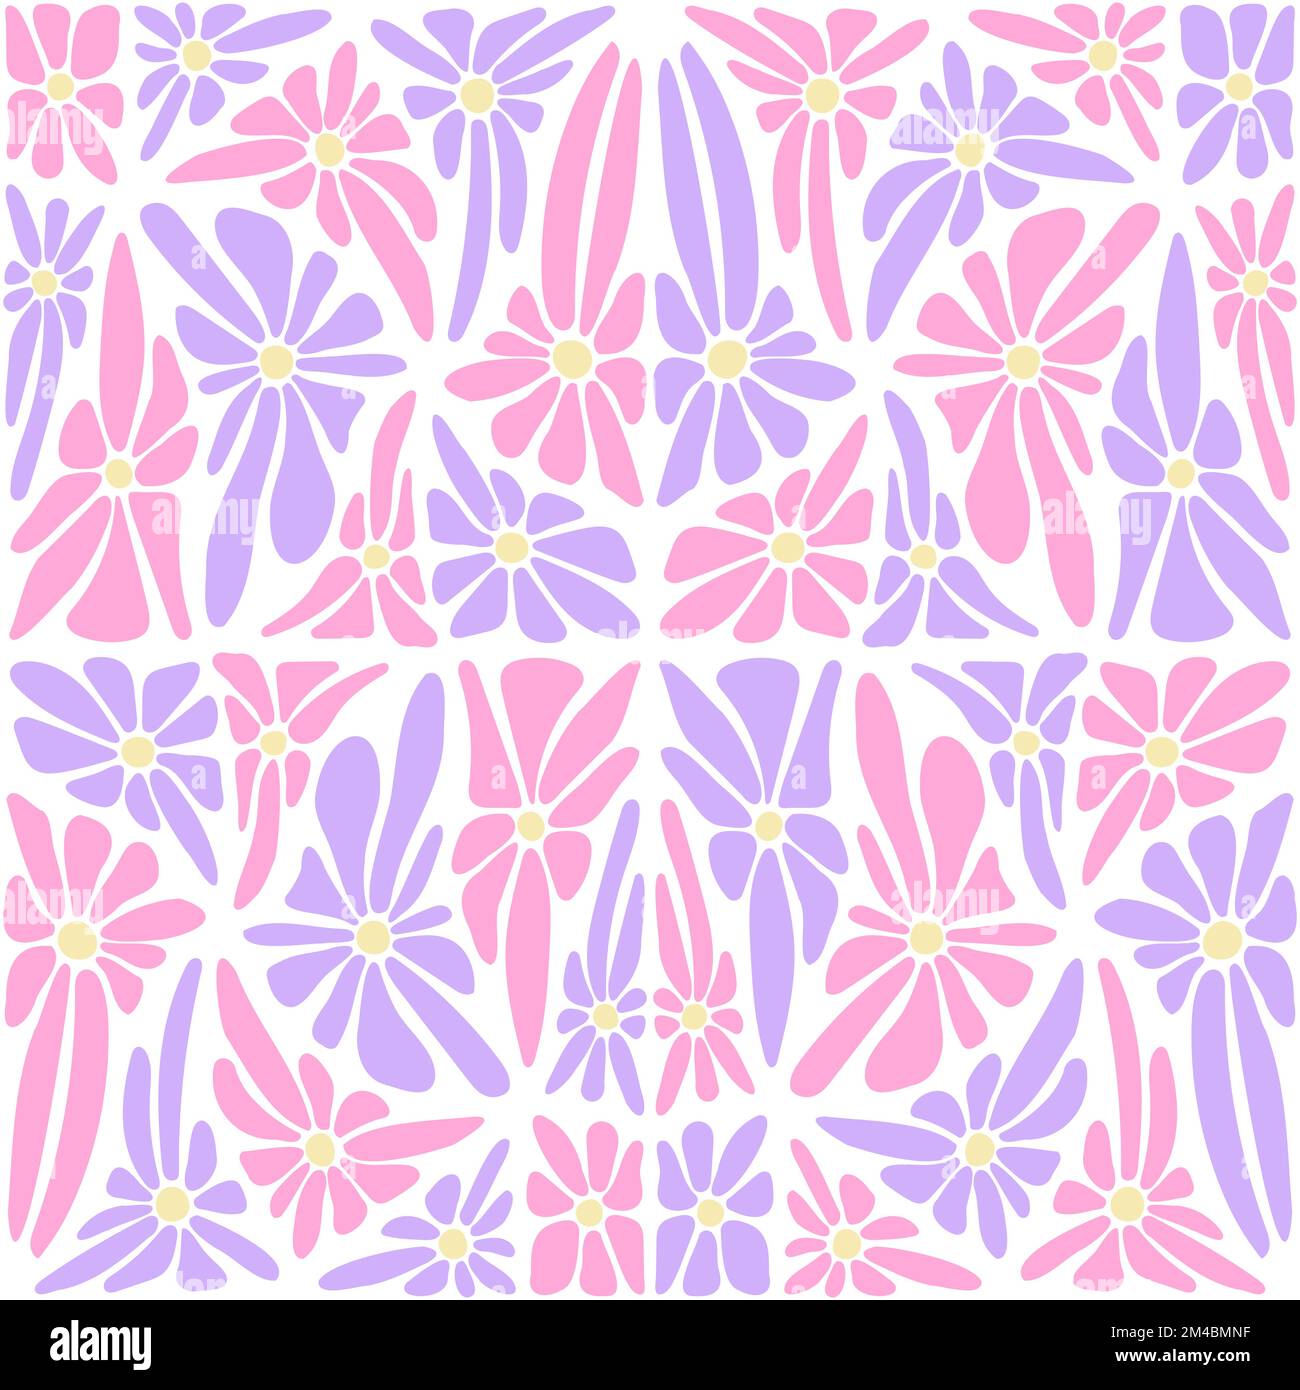 y2k retro kaleidoscopic distorted daisies seamless pattern. Groovy trippy psychedelic geometric polygonal daisy flower. Hippie aesthetic fractal hand Stock Vector